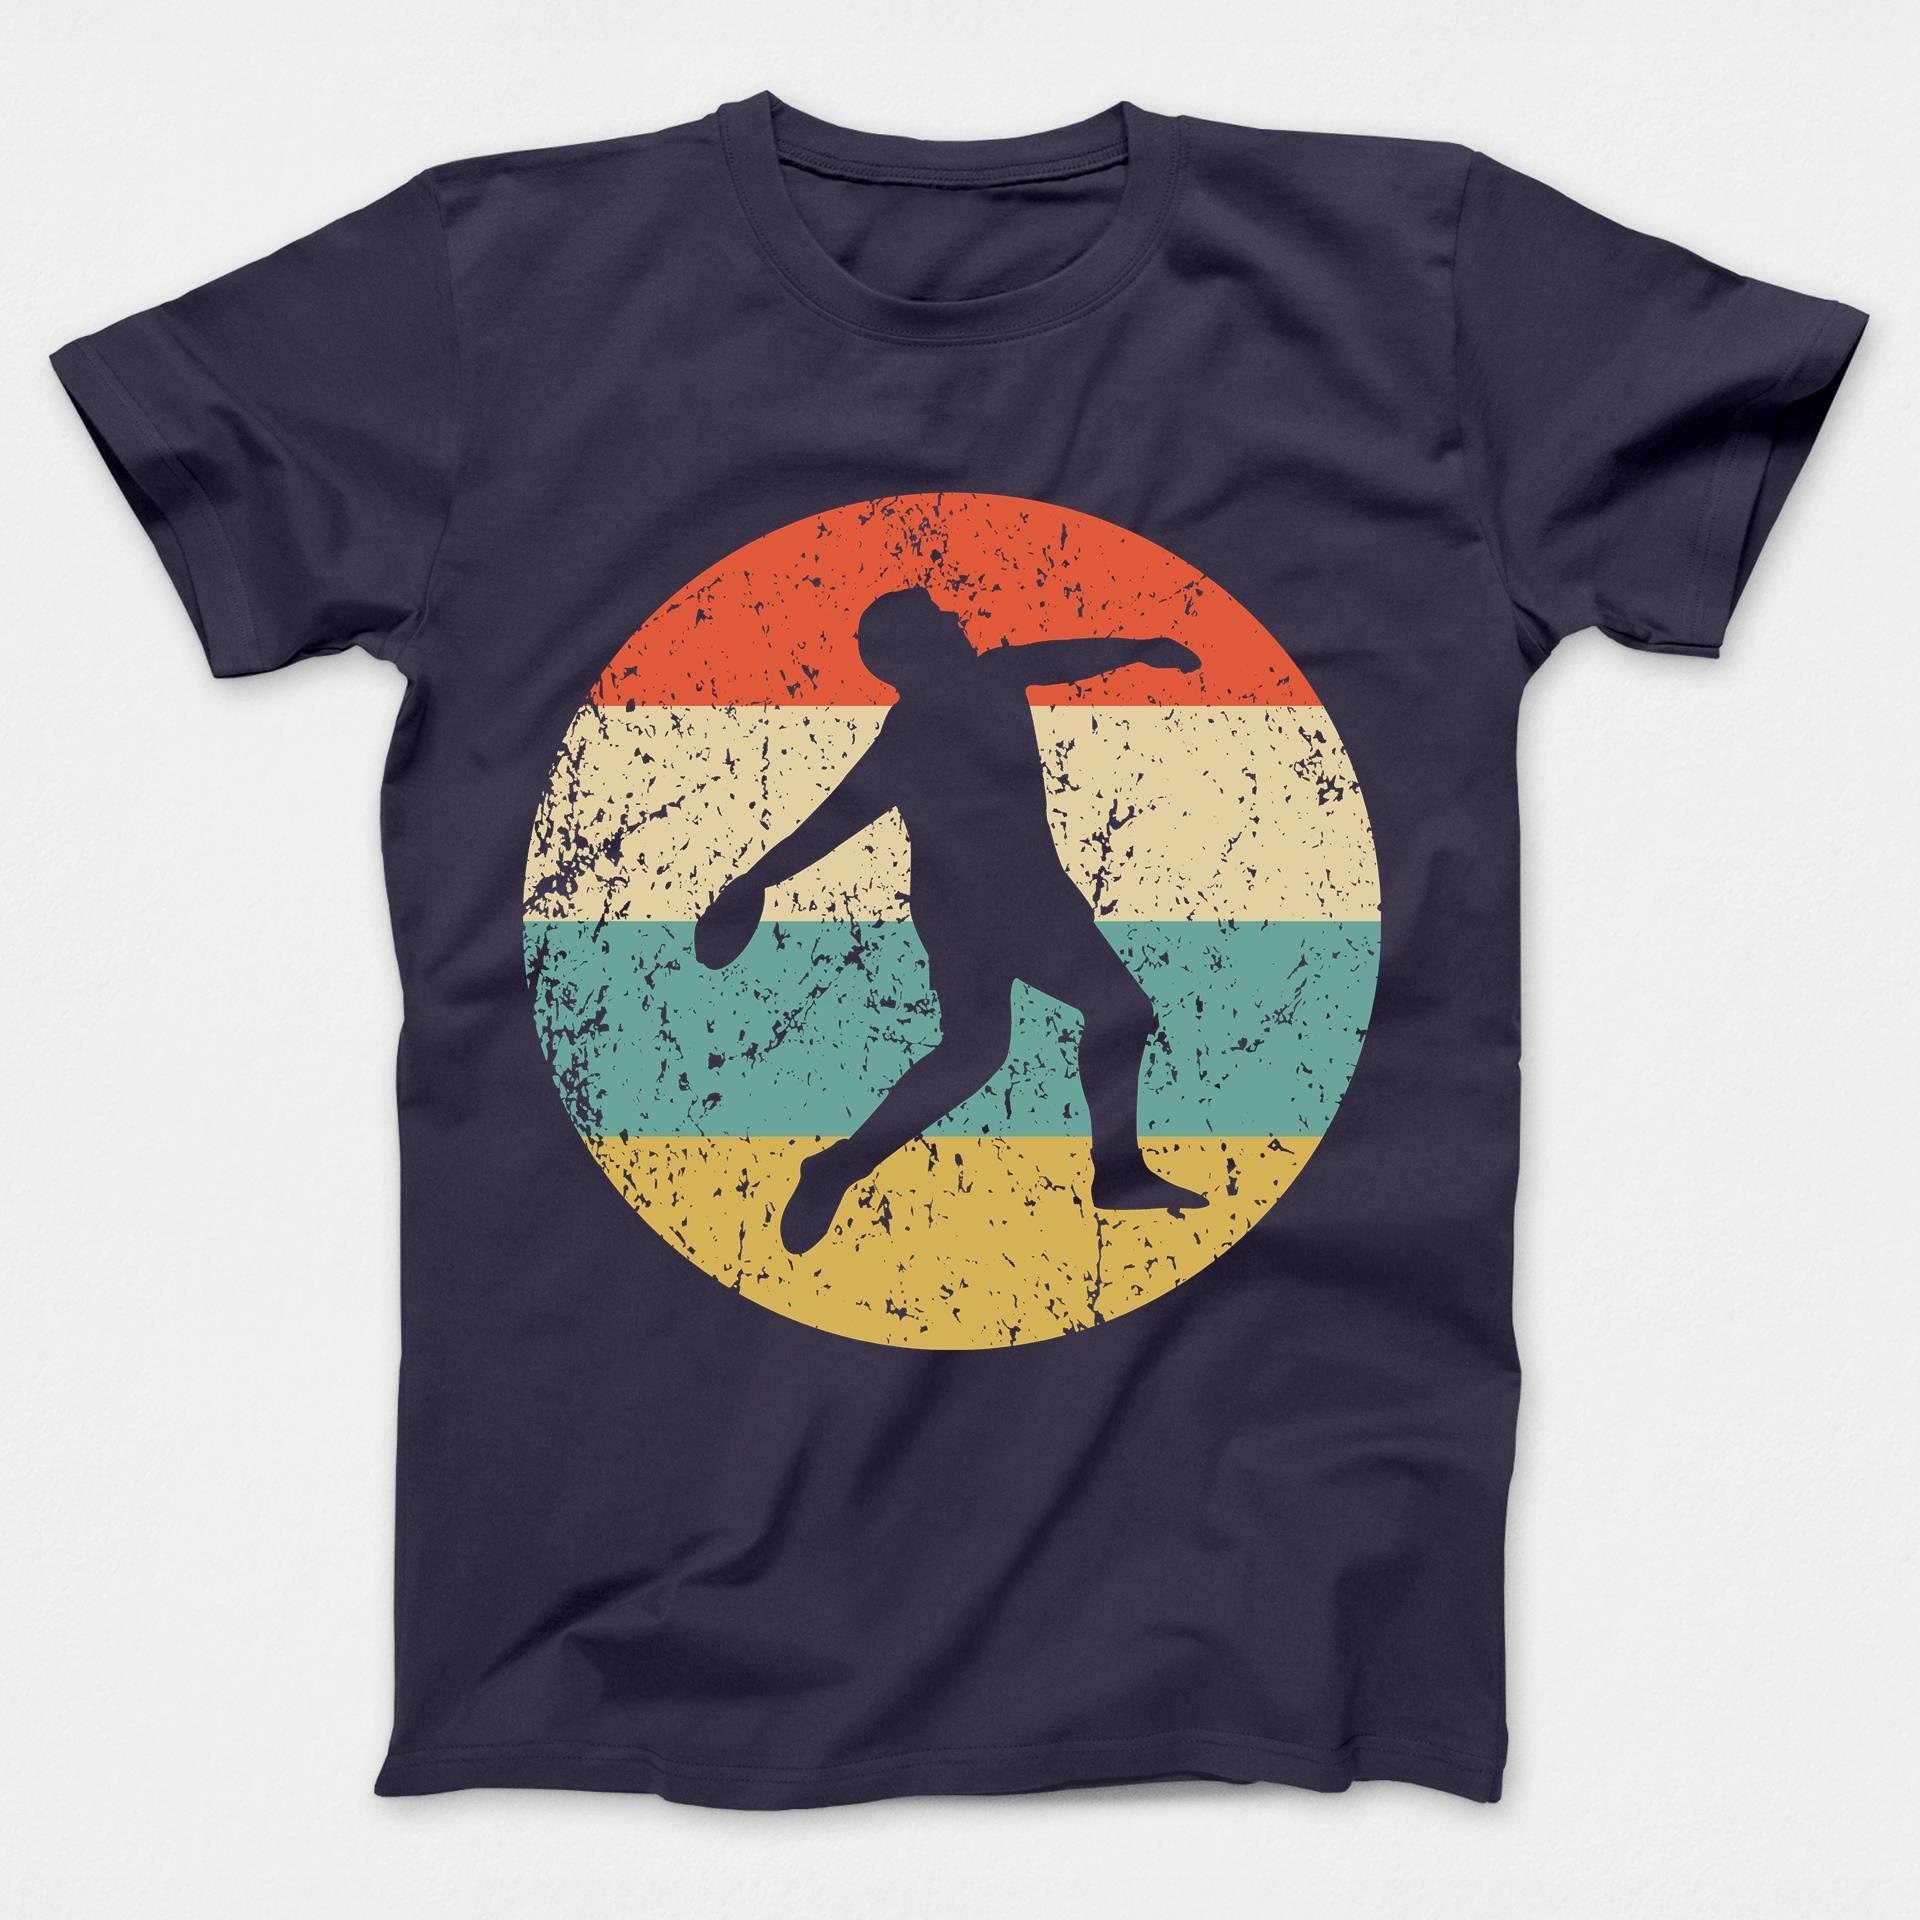 Discus Throw Shirt - Vintage Retro Track And Field Kids T-Shirt